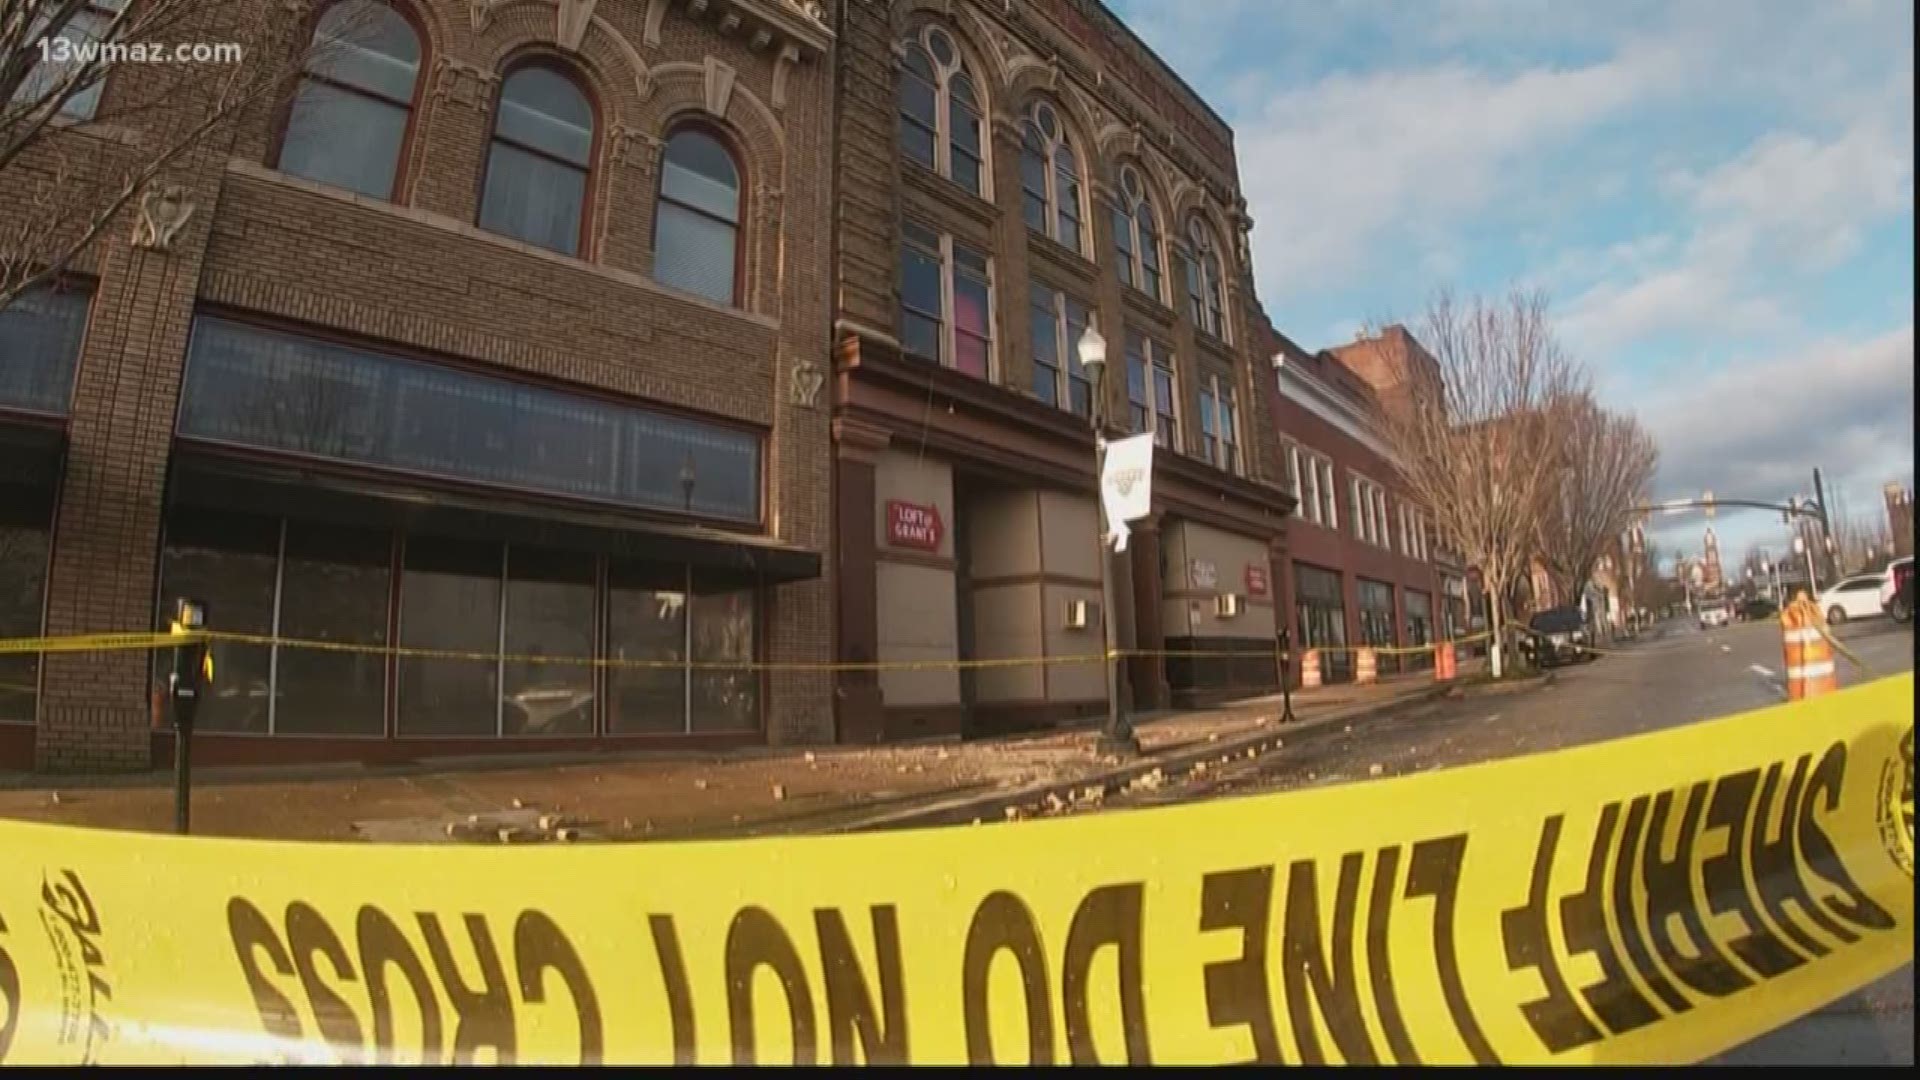 After a lightning strike caused a small fire on top of the historic music venue in downtown Macon Saturday, the owner says they'll be able to open this week.